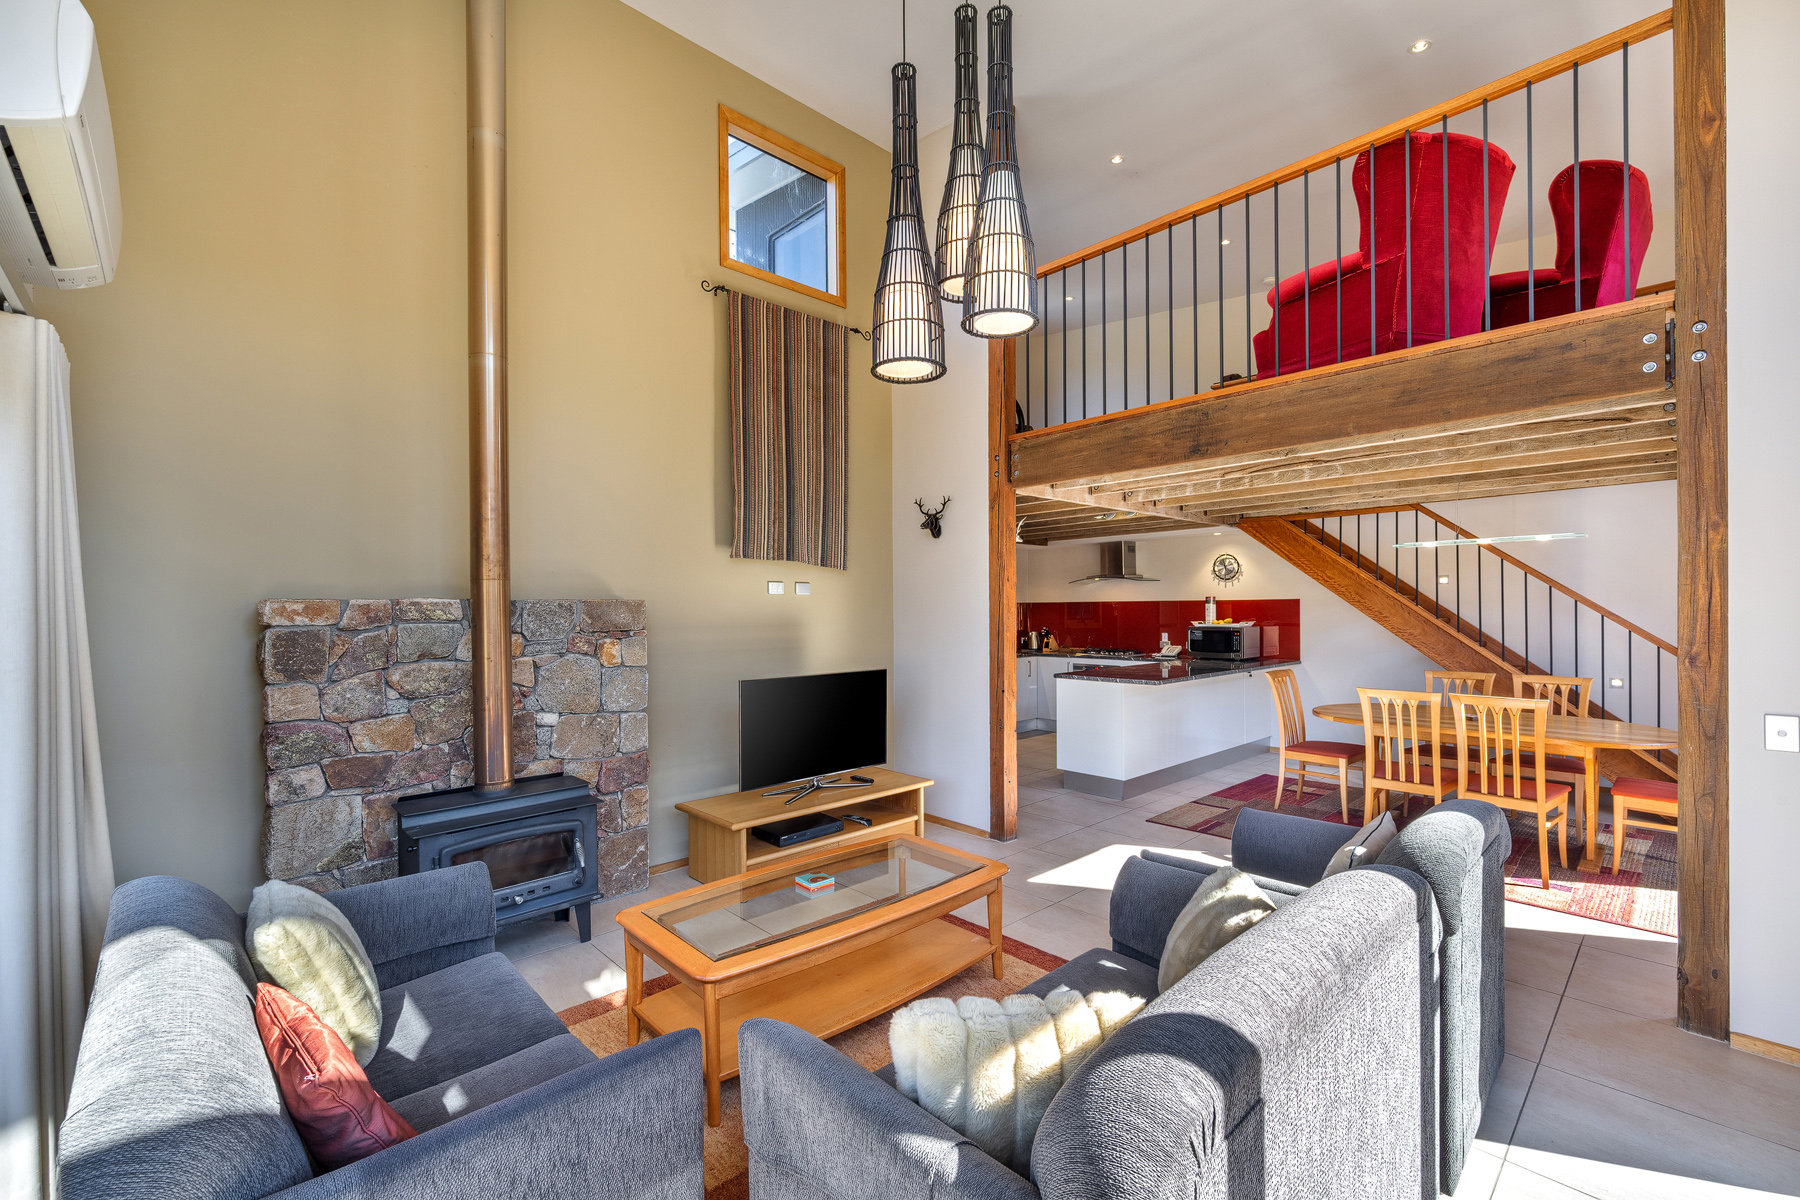 Mogul Rock Chalet – Price: Offers Invited Over $950,000